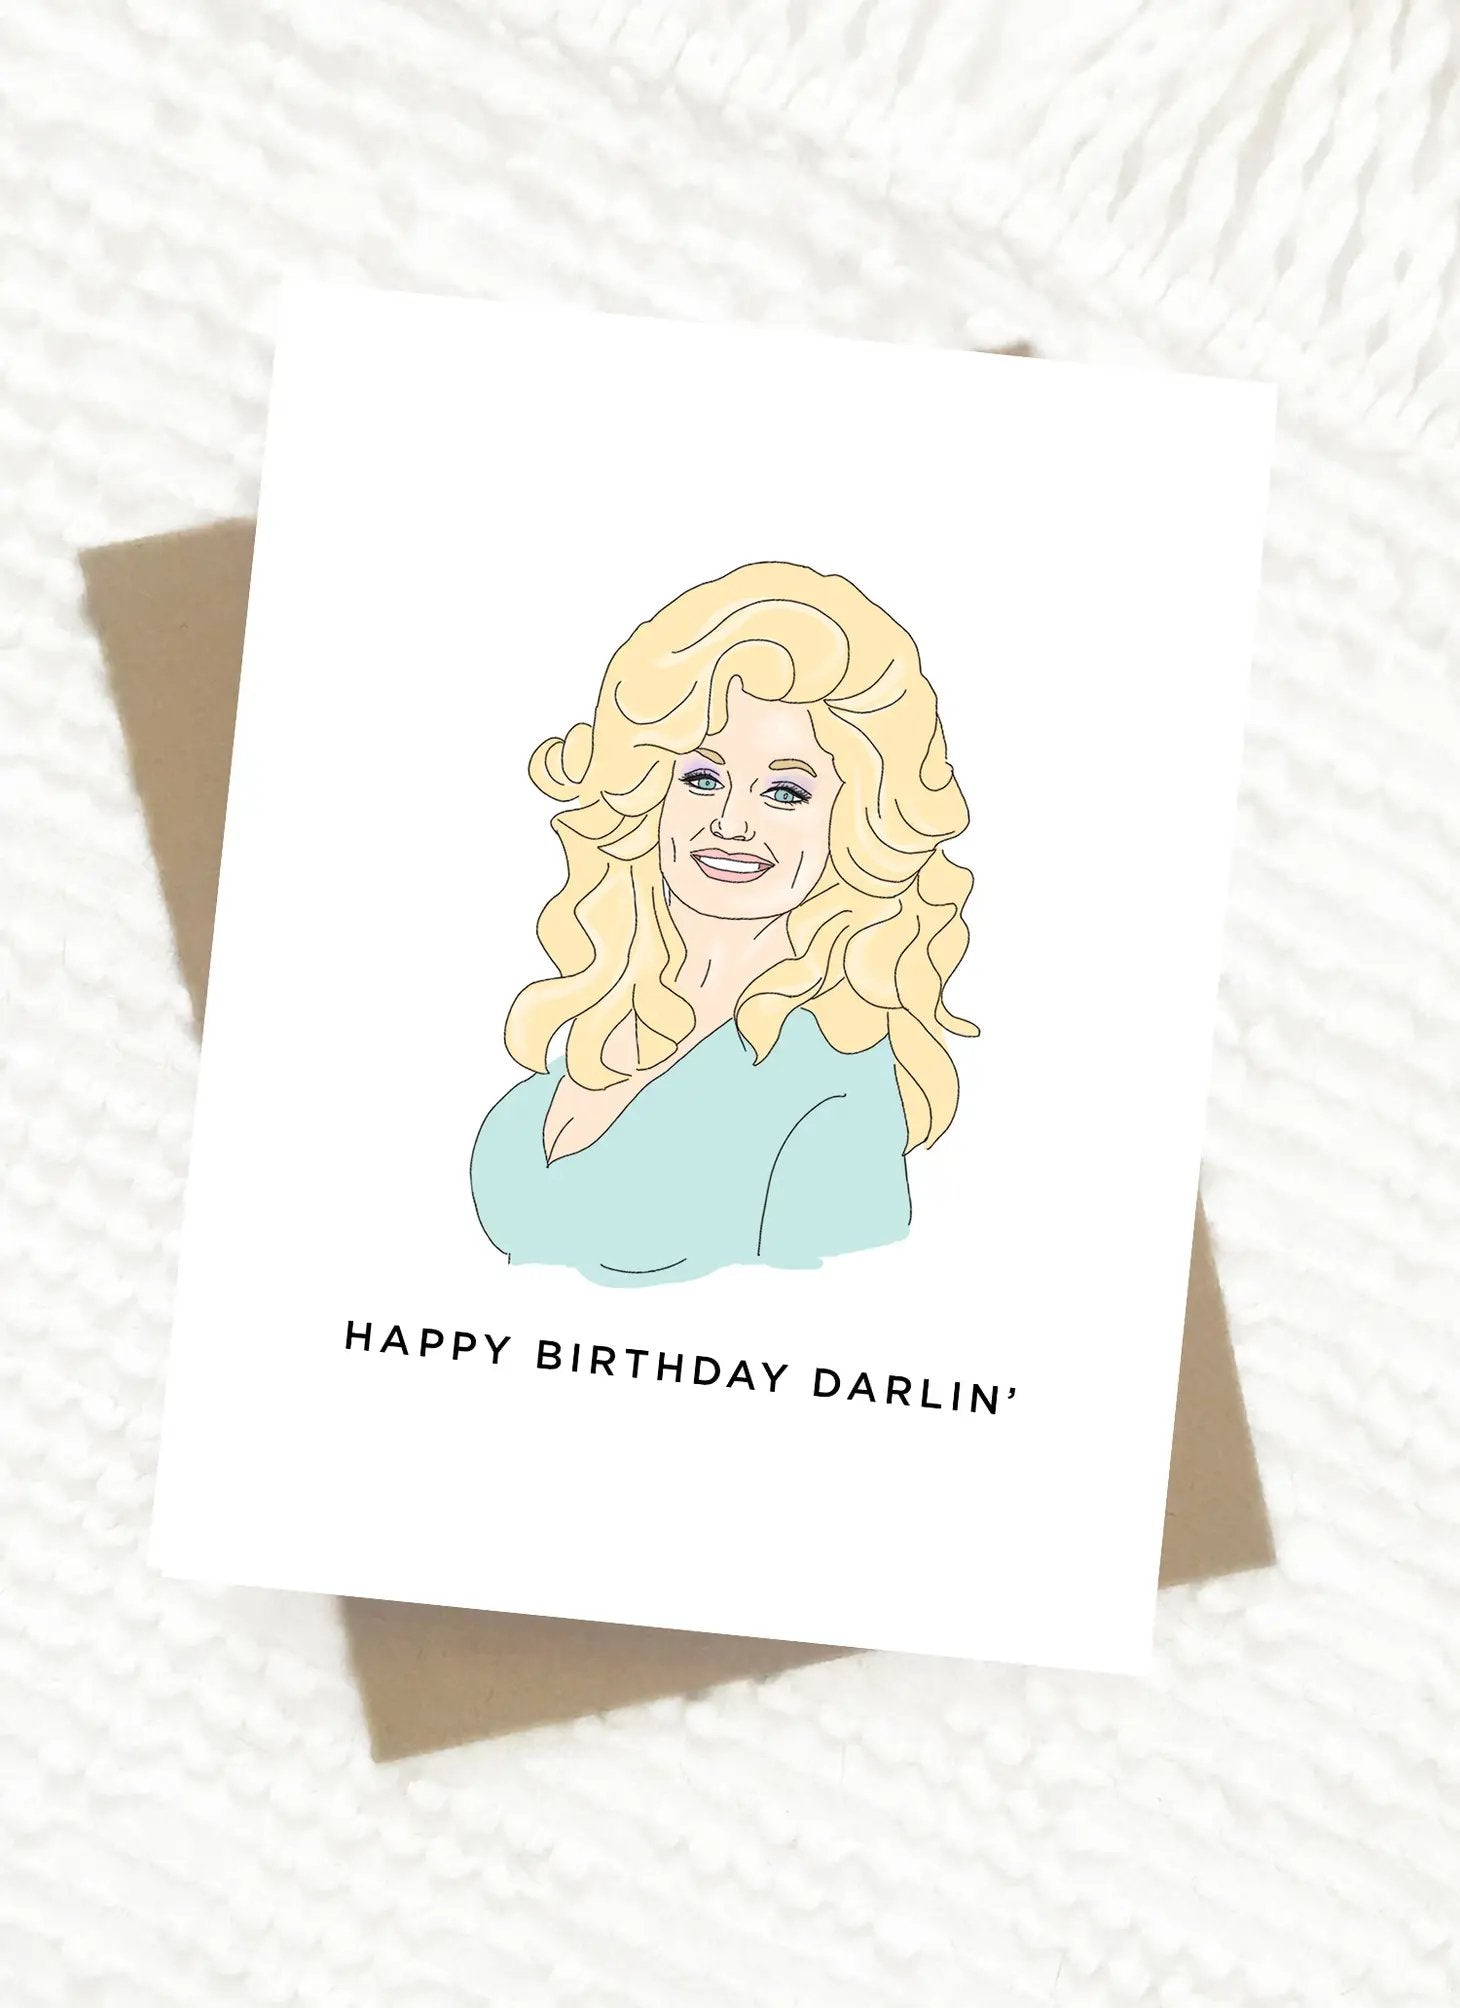 Dolly Parton Birthday Card - Greeting & Note Cards